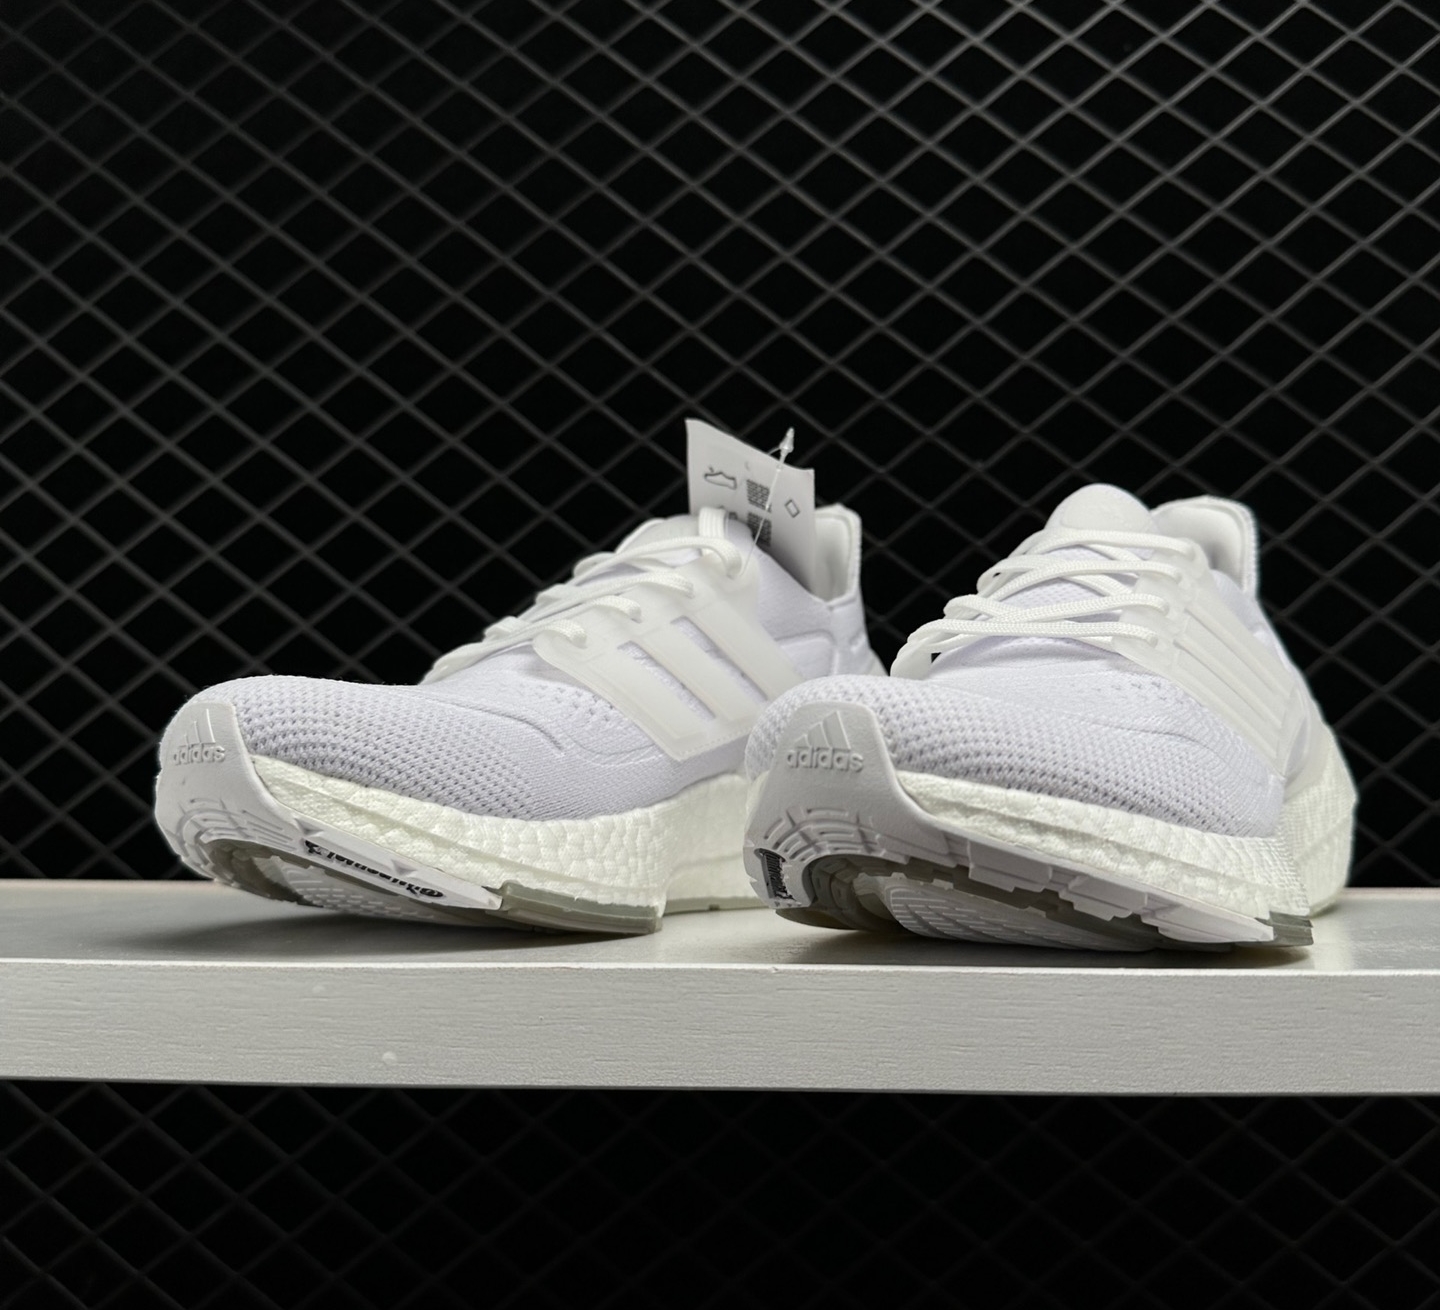 Adidas UltraBoost 21 'Cloud White' FY0403 - Premium Comfort and Style